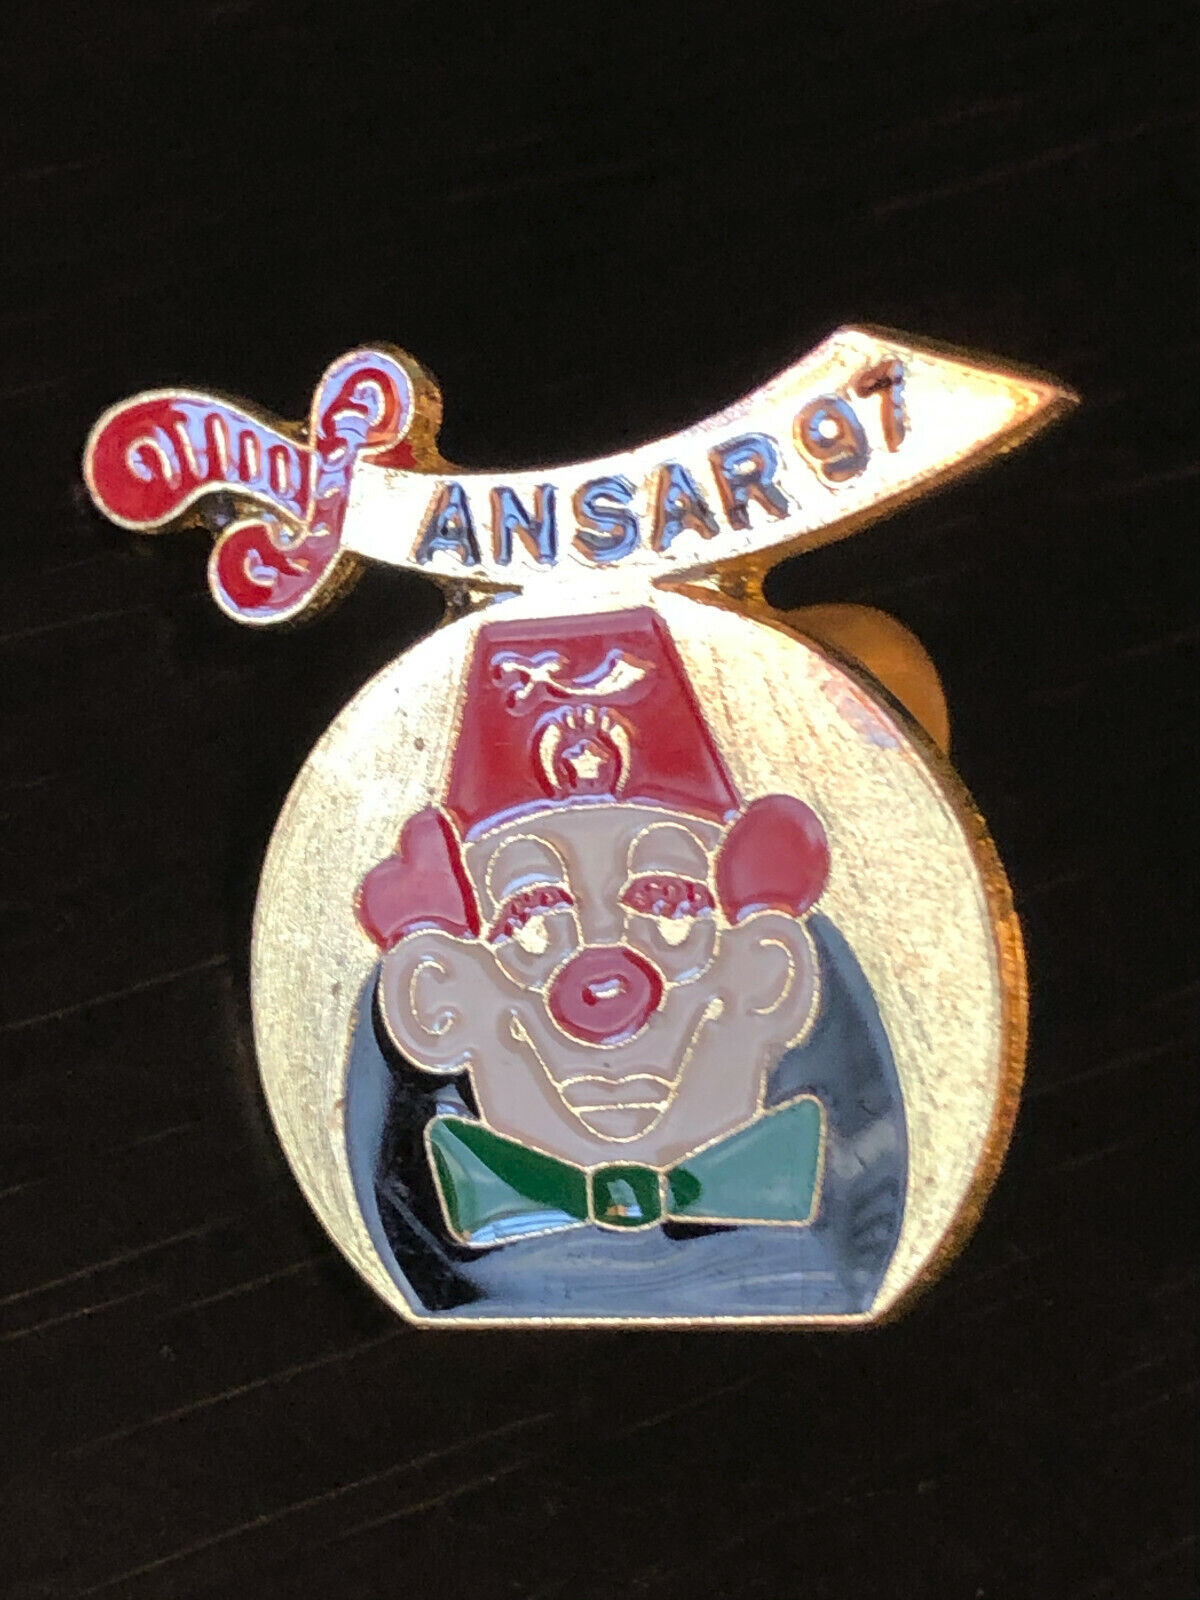  Vintage Collectible Ansar 97 Shriners Metal Colorful Pin Back Lapel Pin Hat Pin